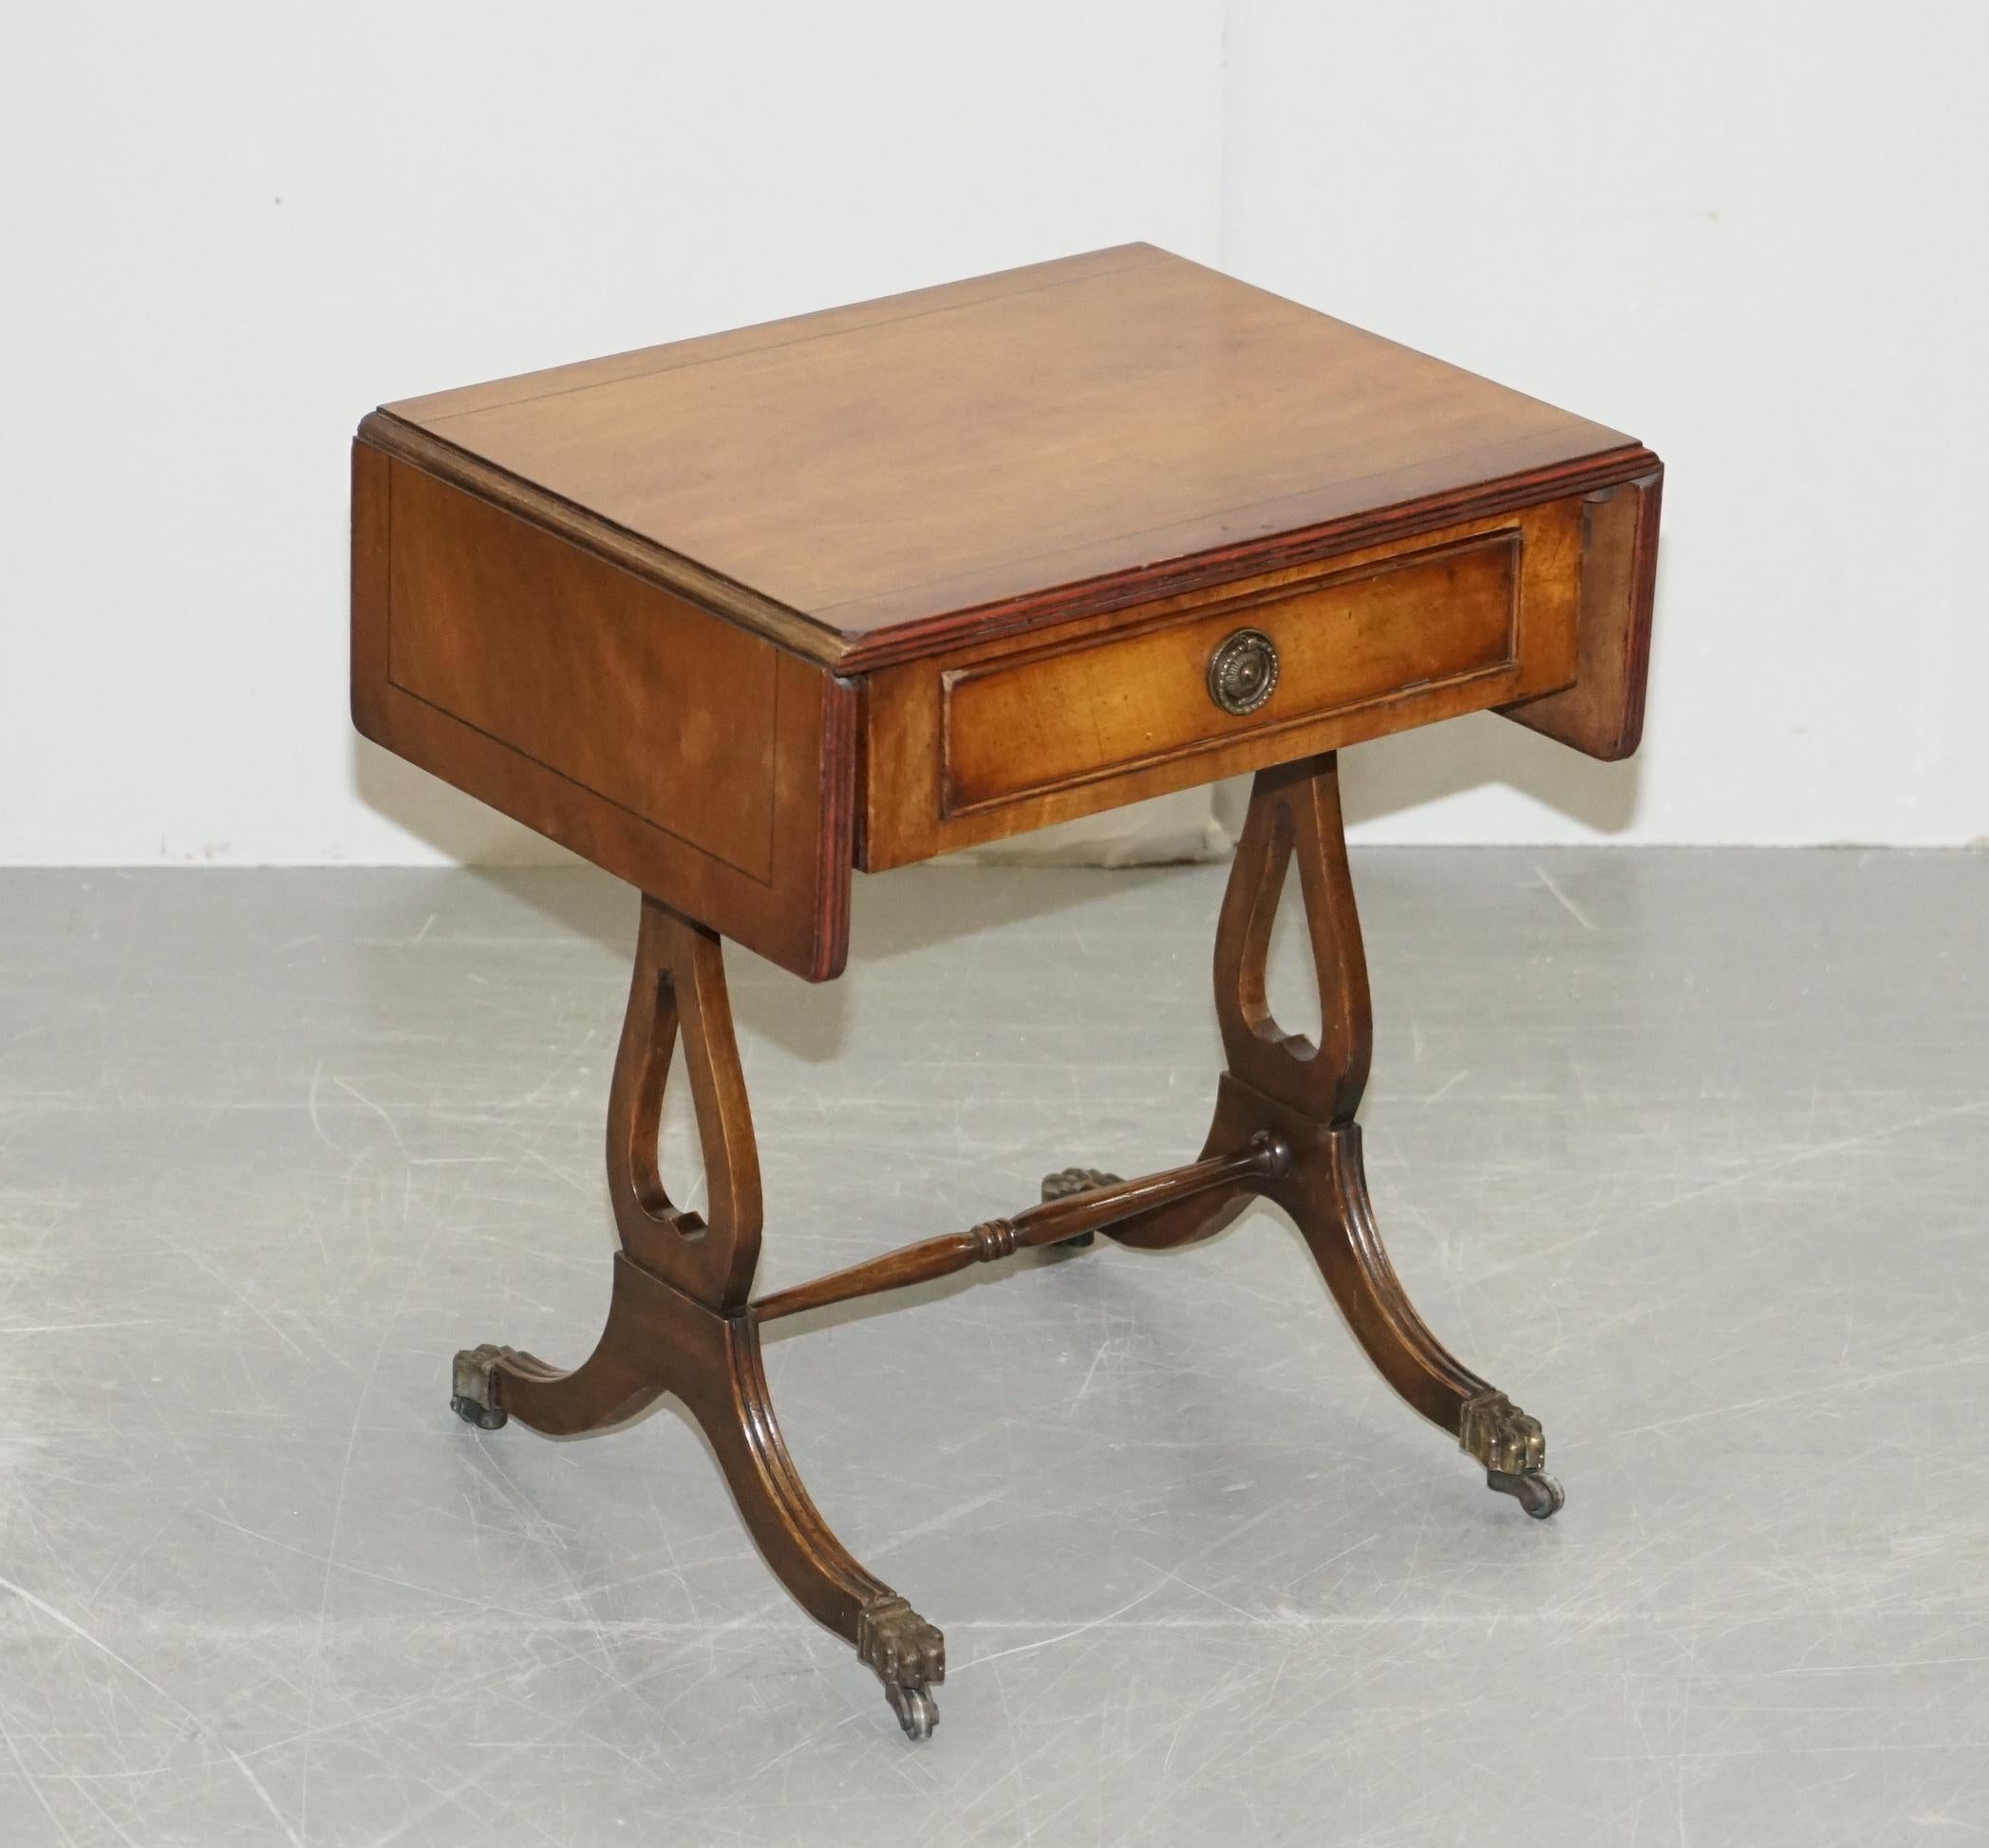 We are delighted to offer for sale this lovely condition vintage Bevan Funnell light walnut extending side table

This is a very well made and versatile piece with a timber patina to die for, I have never seen one in this quality walnut